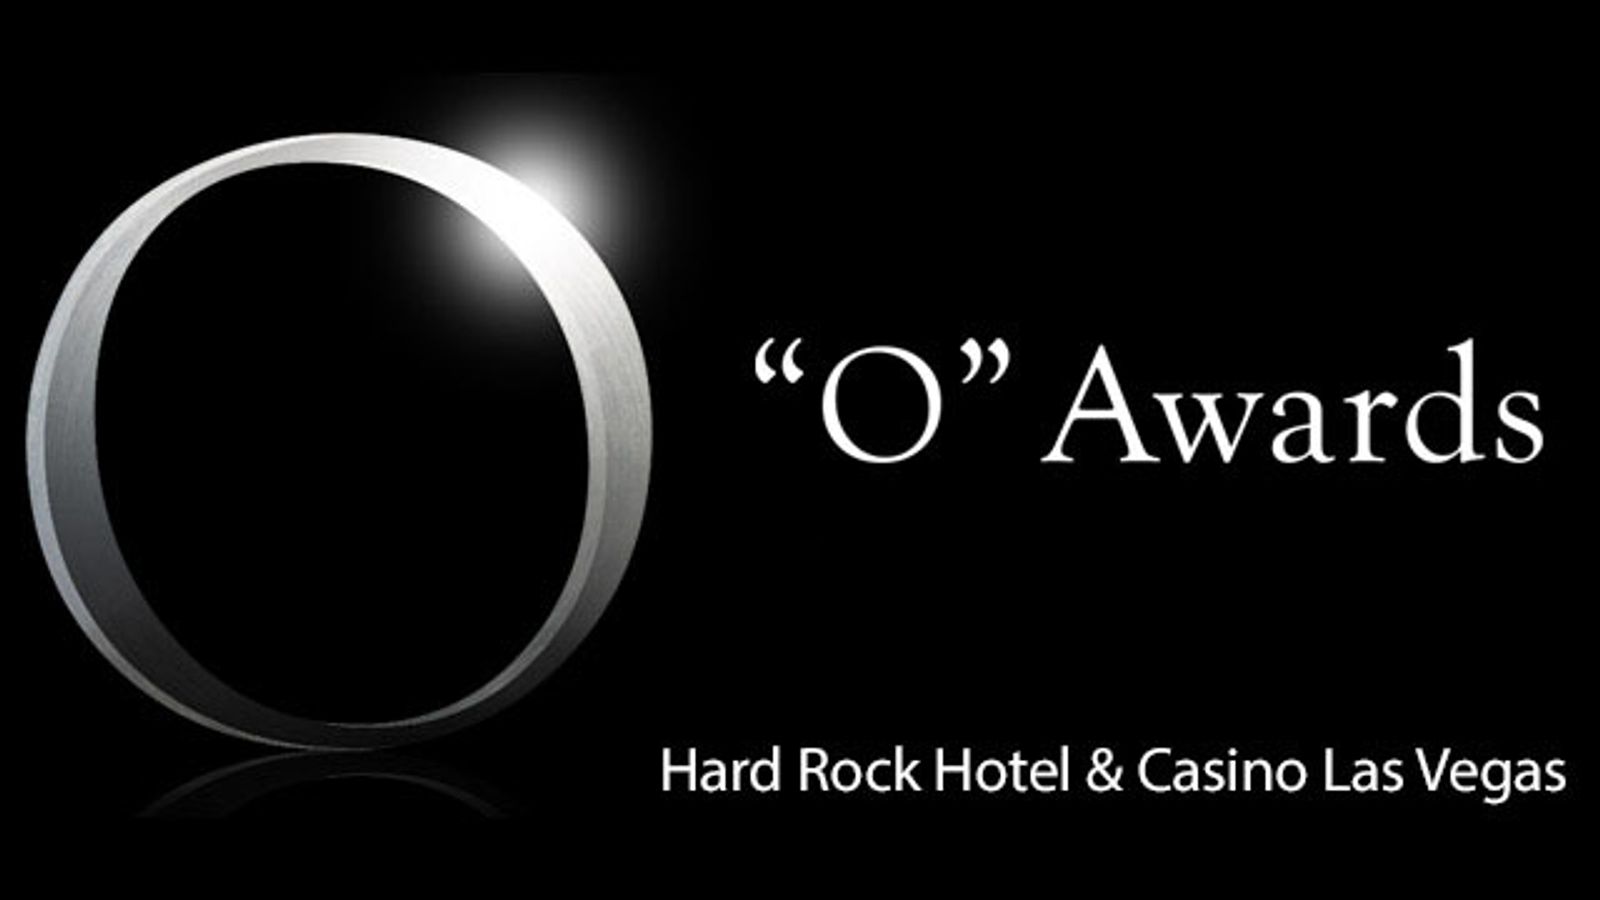 AVN Presents the Nominees for the 7th Annual 'O' Awards